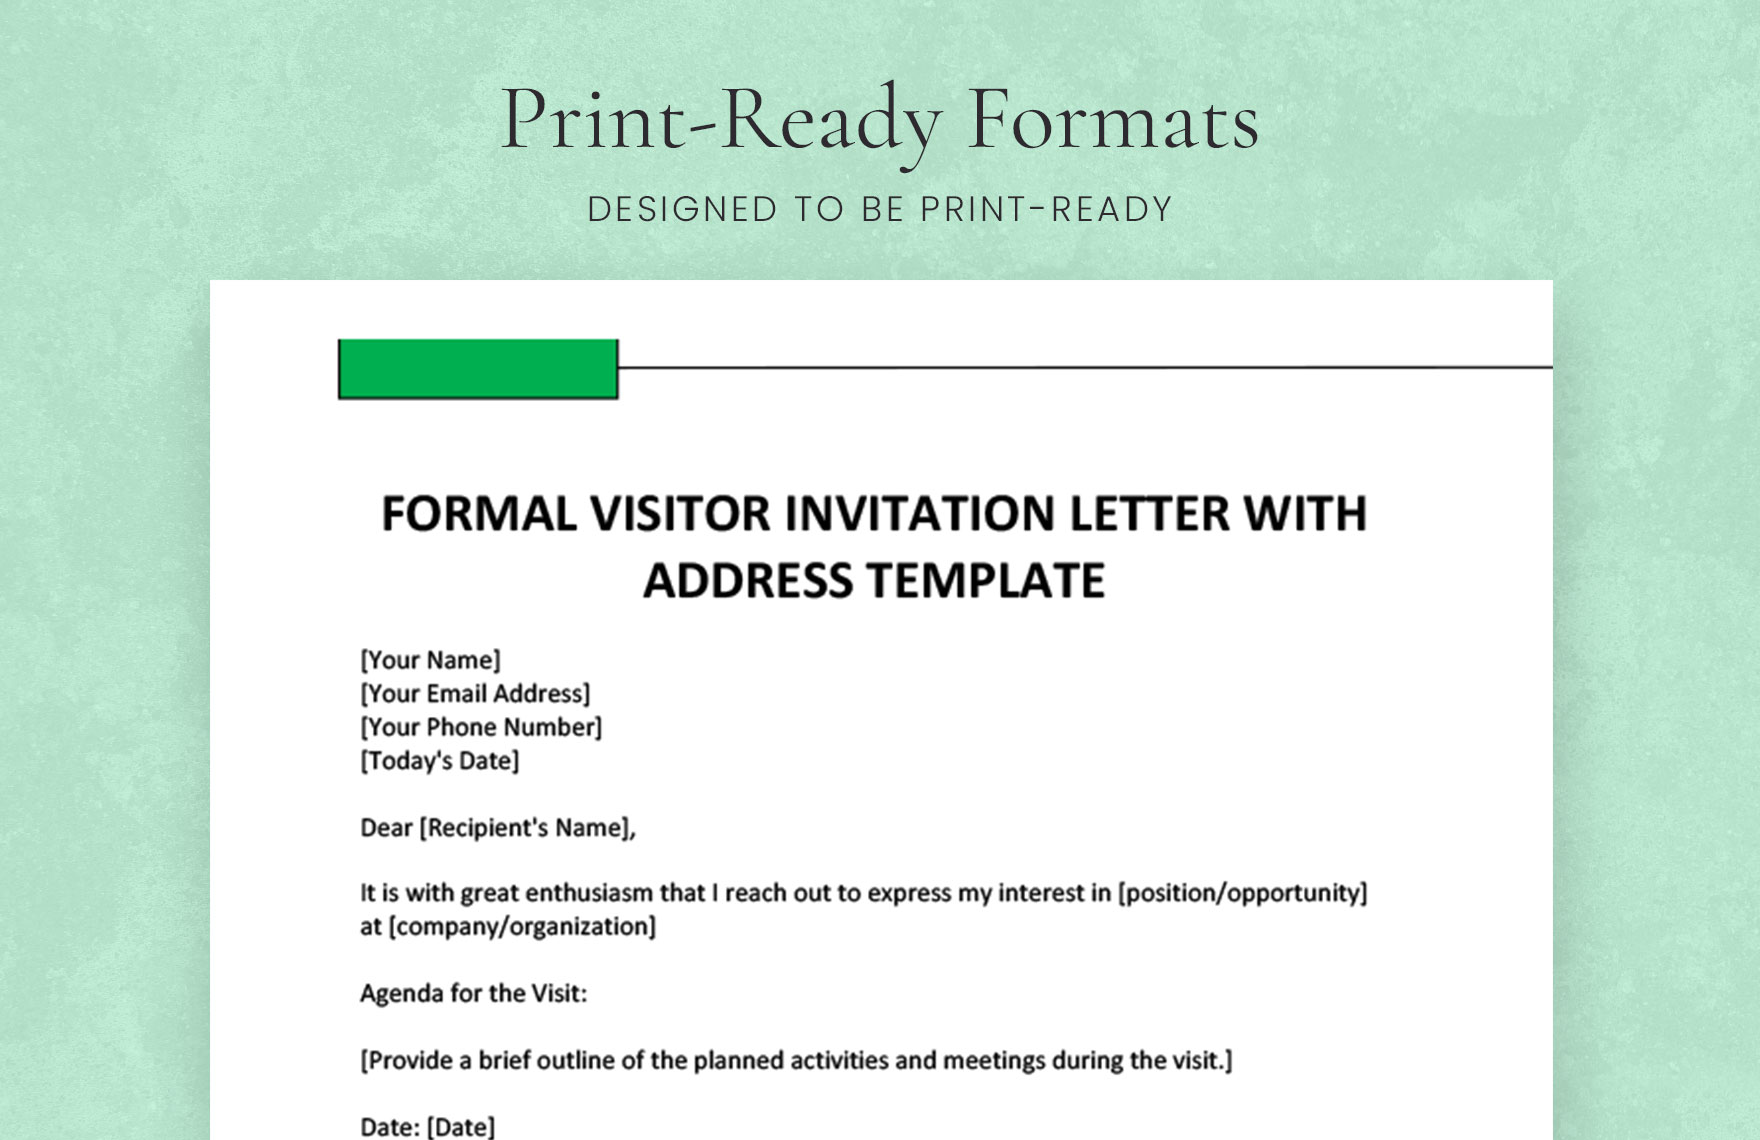 Formal Visitor Invitation Letter with Address Template